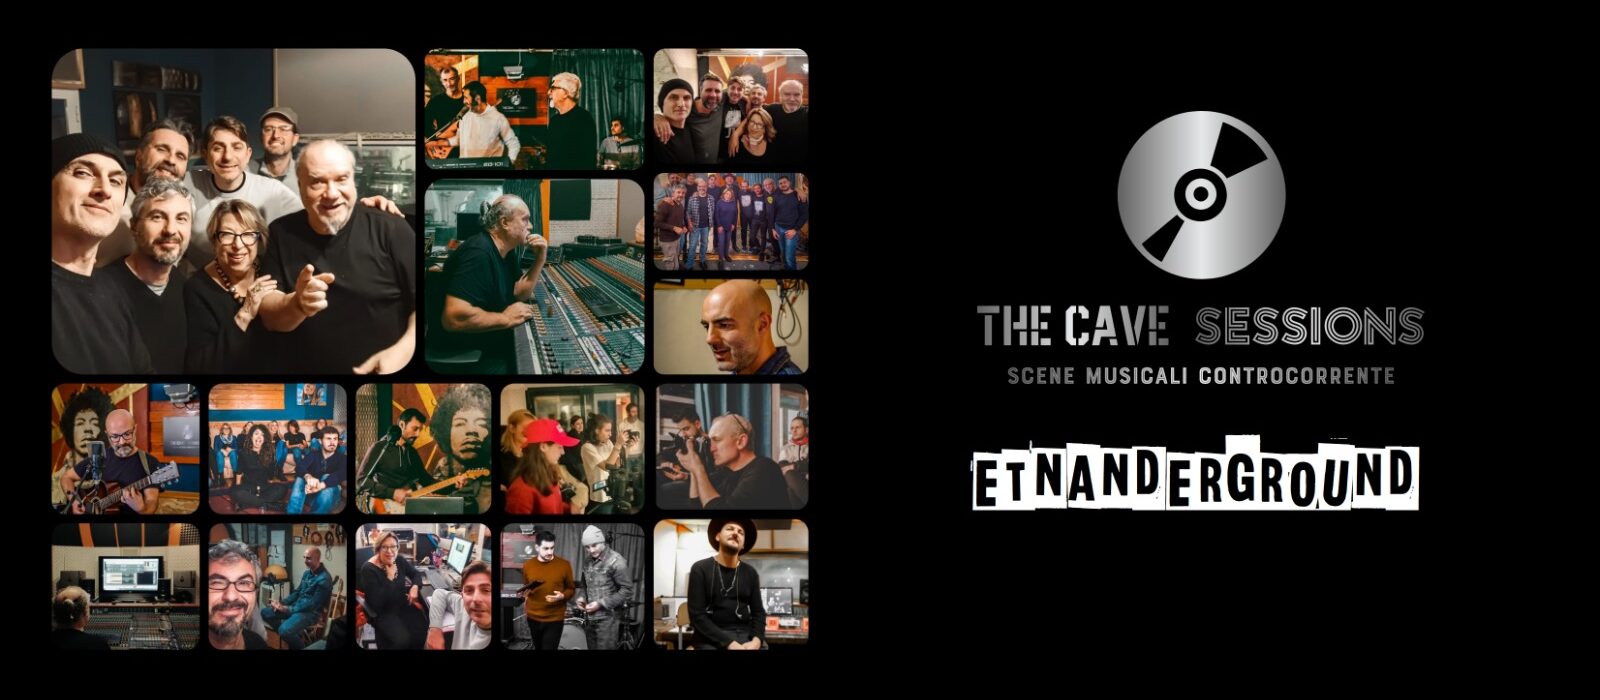 The Cave Sessions – Etnanderground